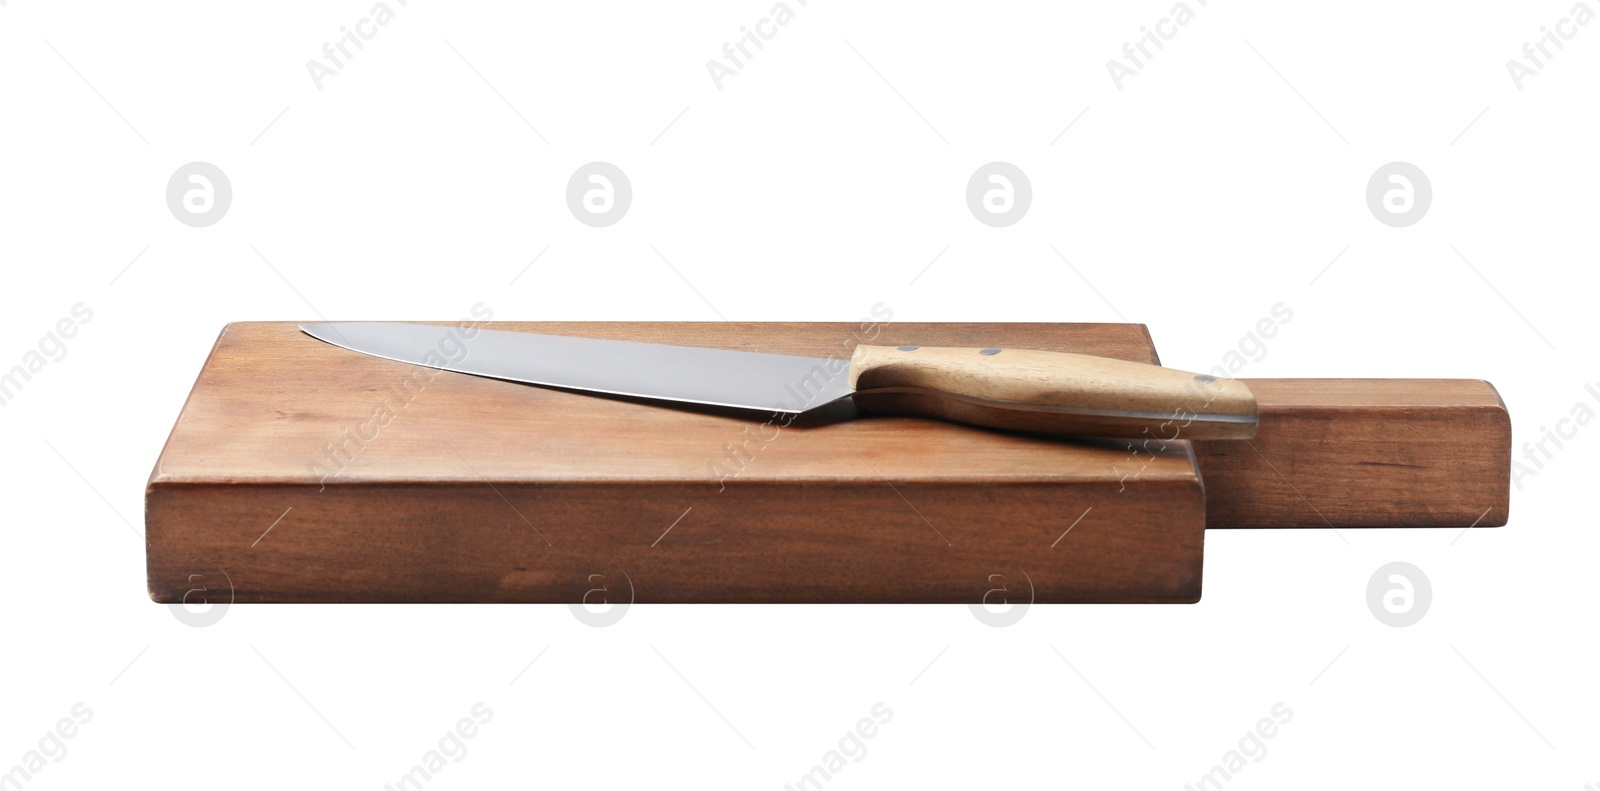 Photo of Stainless steel chef's knife with wooden handle on board against white background